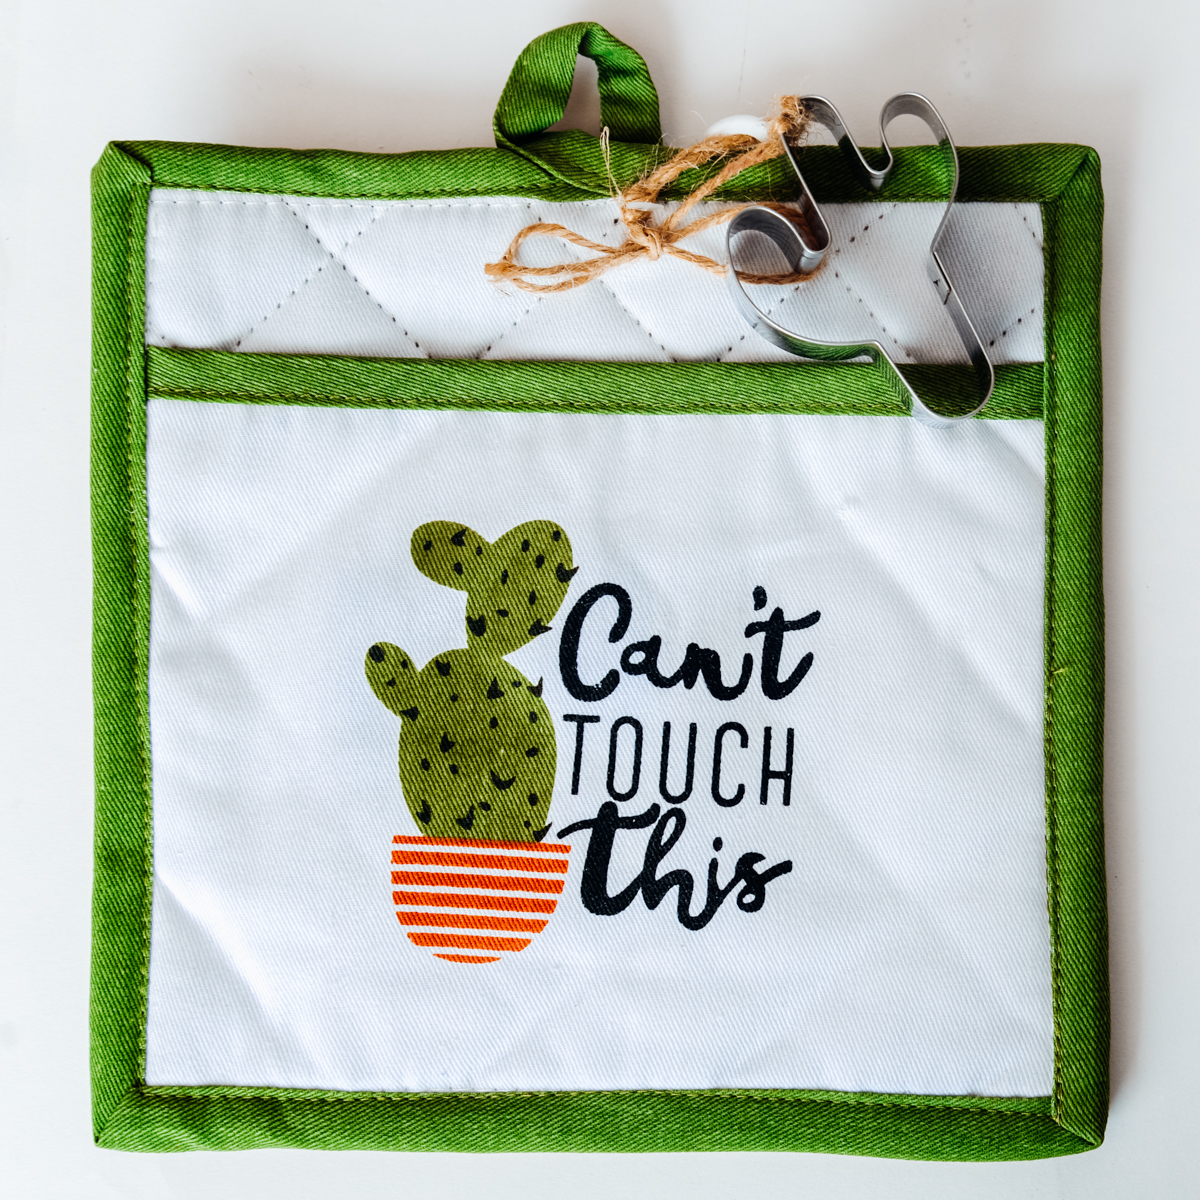 Sonoran Souvenirs "Can't Touch This" Cactus Kitchen Gift Set Tohono Chul